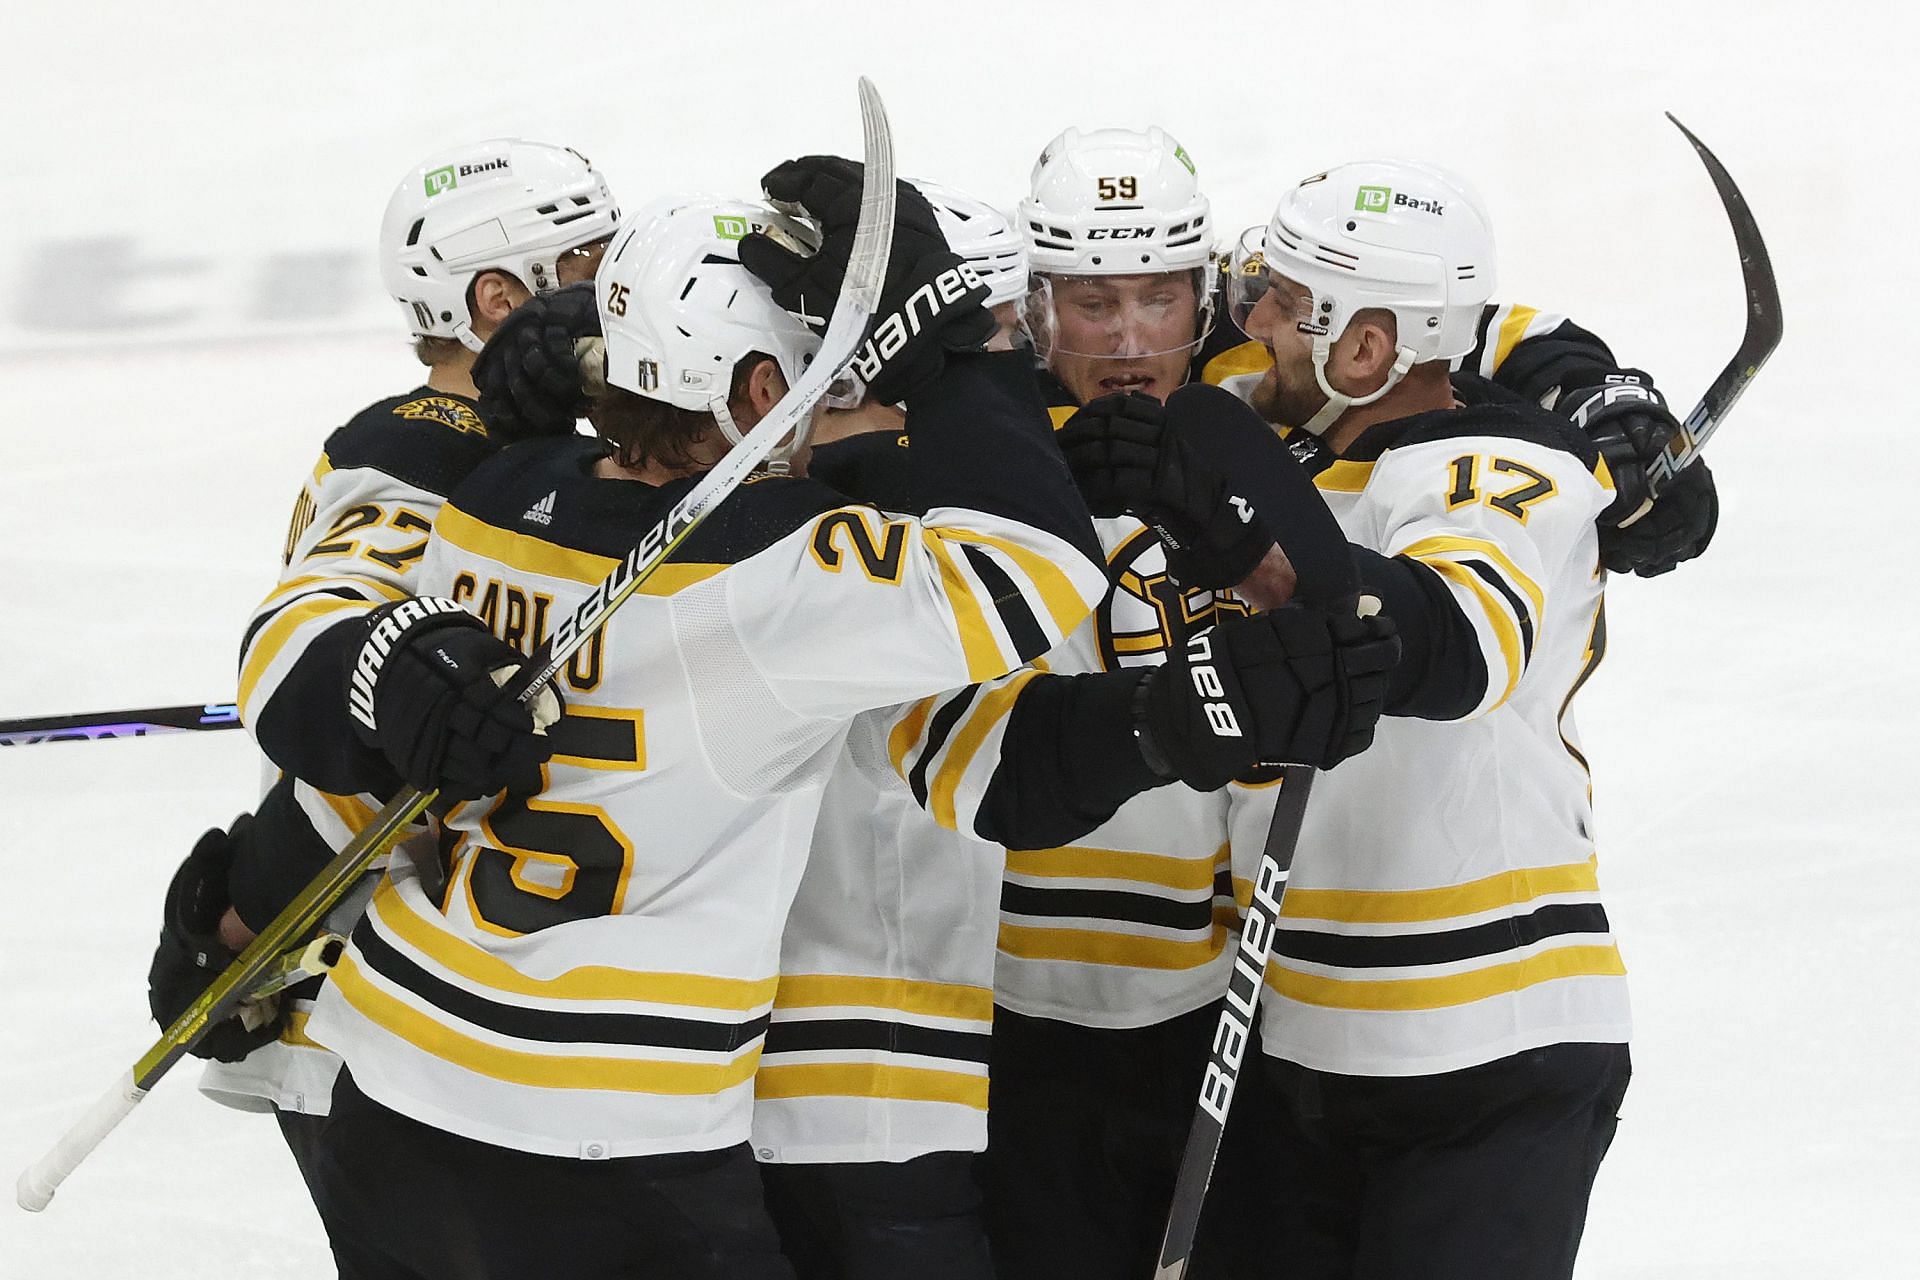 Boston Bruins fans predict elimination for Florida Panthers in the next